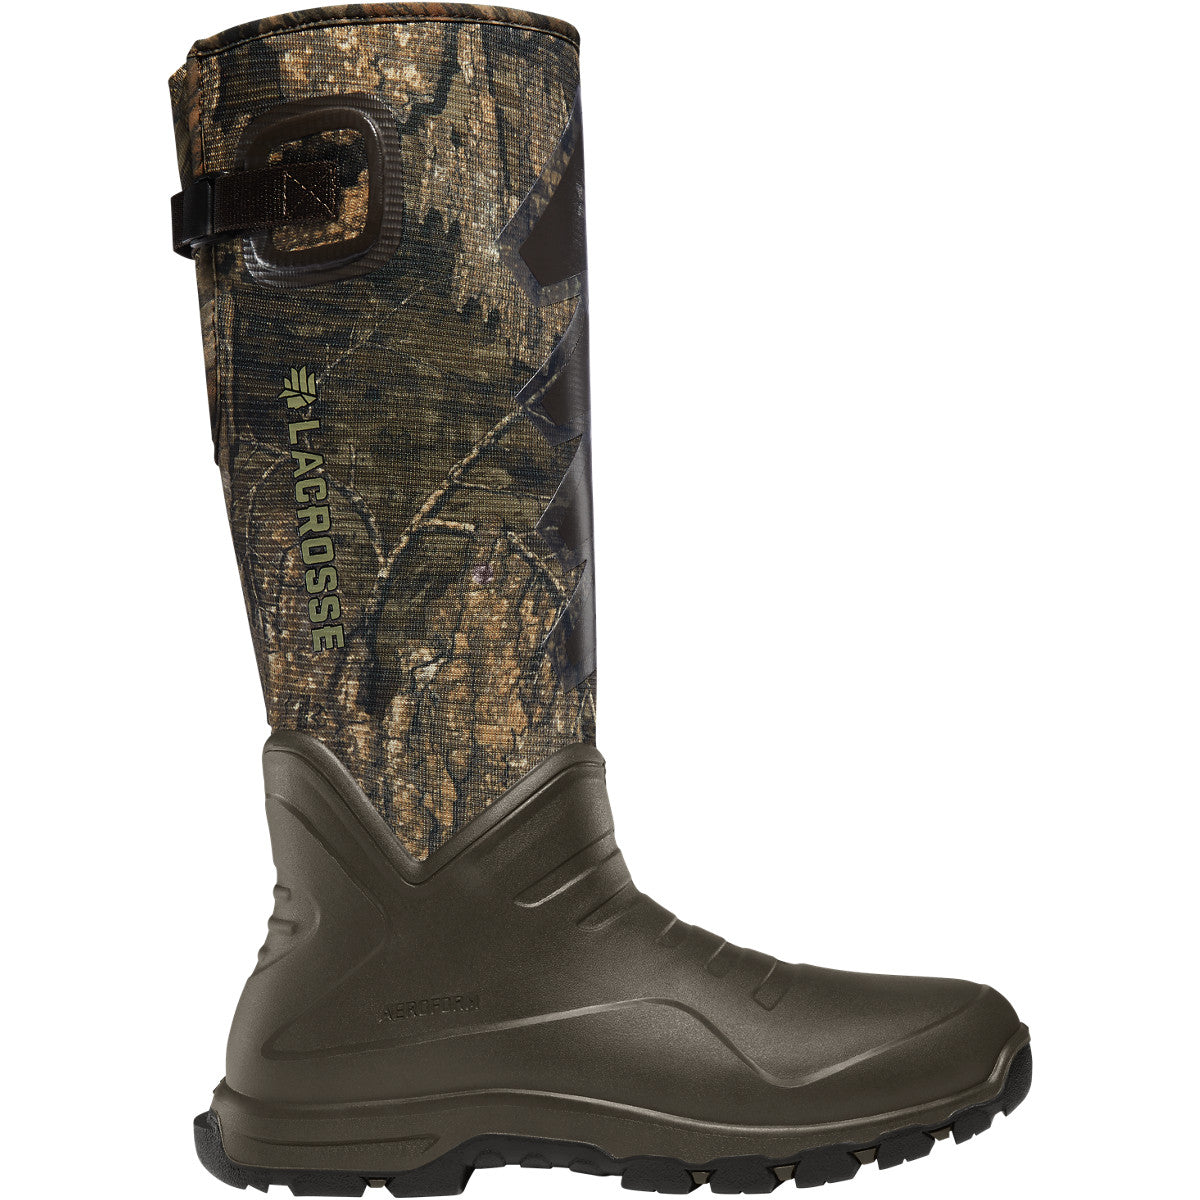 Lacrosse Aerohead Sport 16" Boot-HUNTING/OUTDOORS-Timber-9-Kevin's Fine Outdoor Gear & Apparel